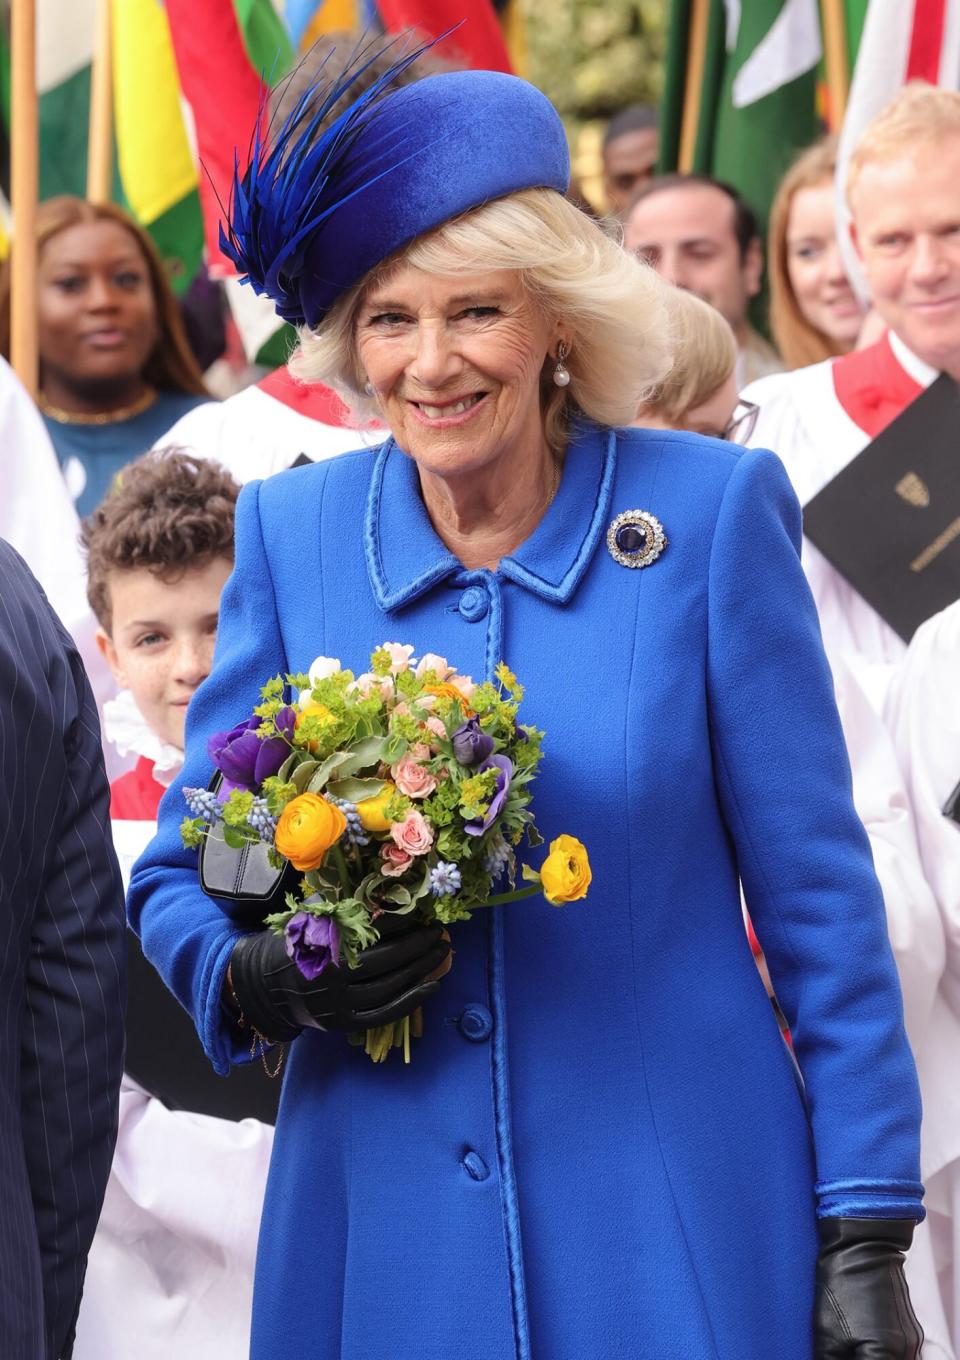 Camilla, Queen Consort holds a bouquet of flowers and smiles as she departs the 2023 Commonwealth Day Service at Westminster Abbey